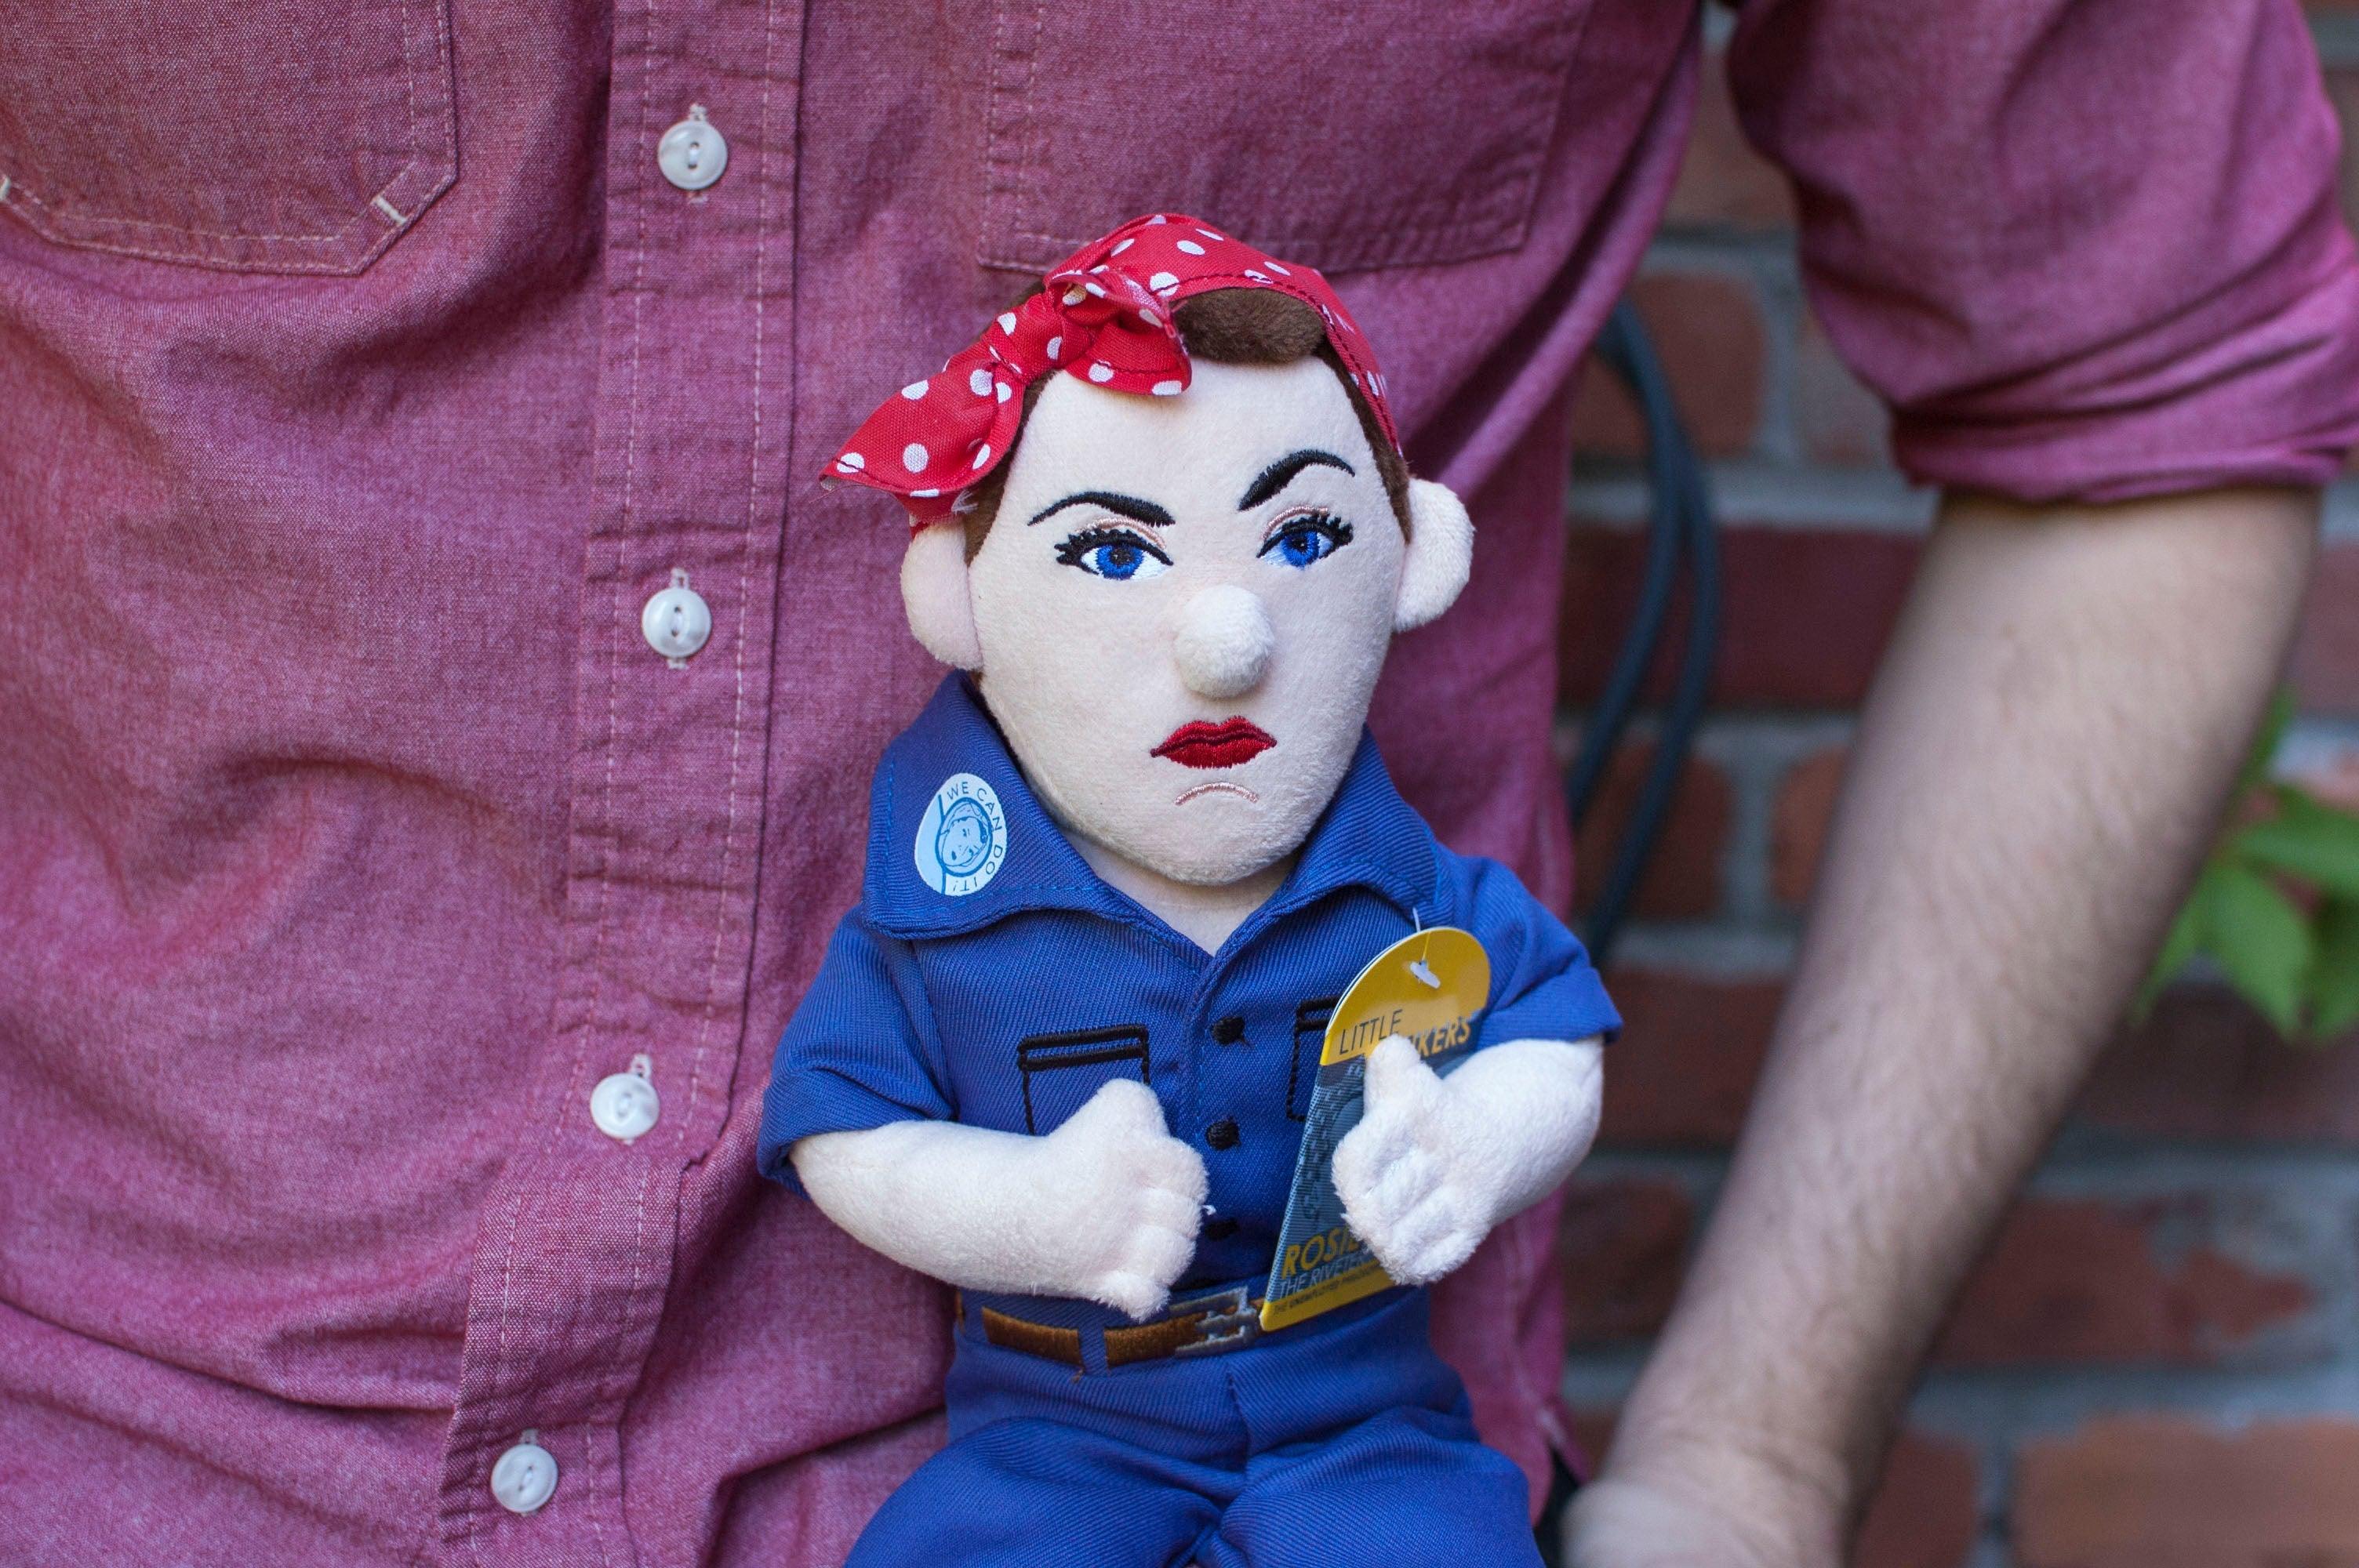 Product photo of Rosie the Riveter Plush Doll, a novelty gift manufactured by The Unemployed Philosophers Guild.